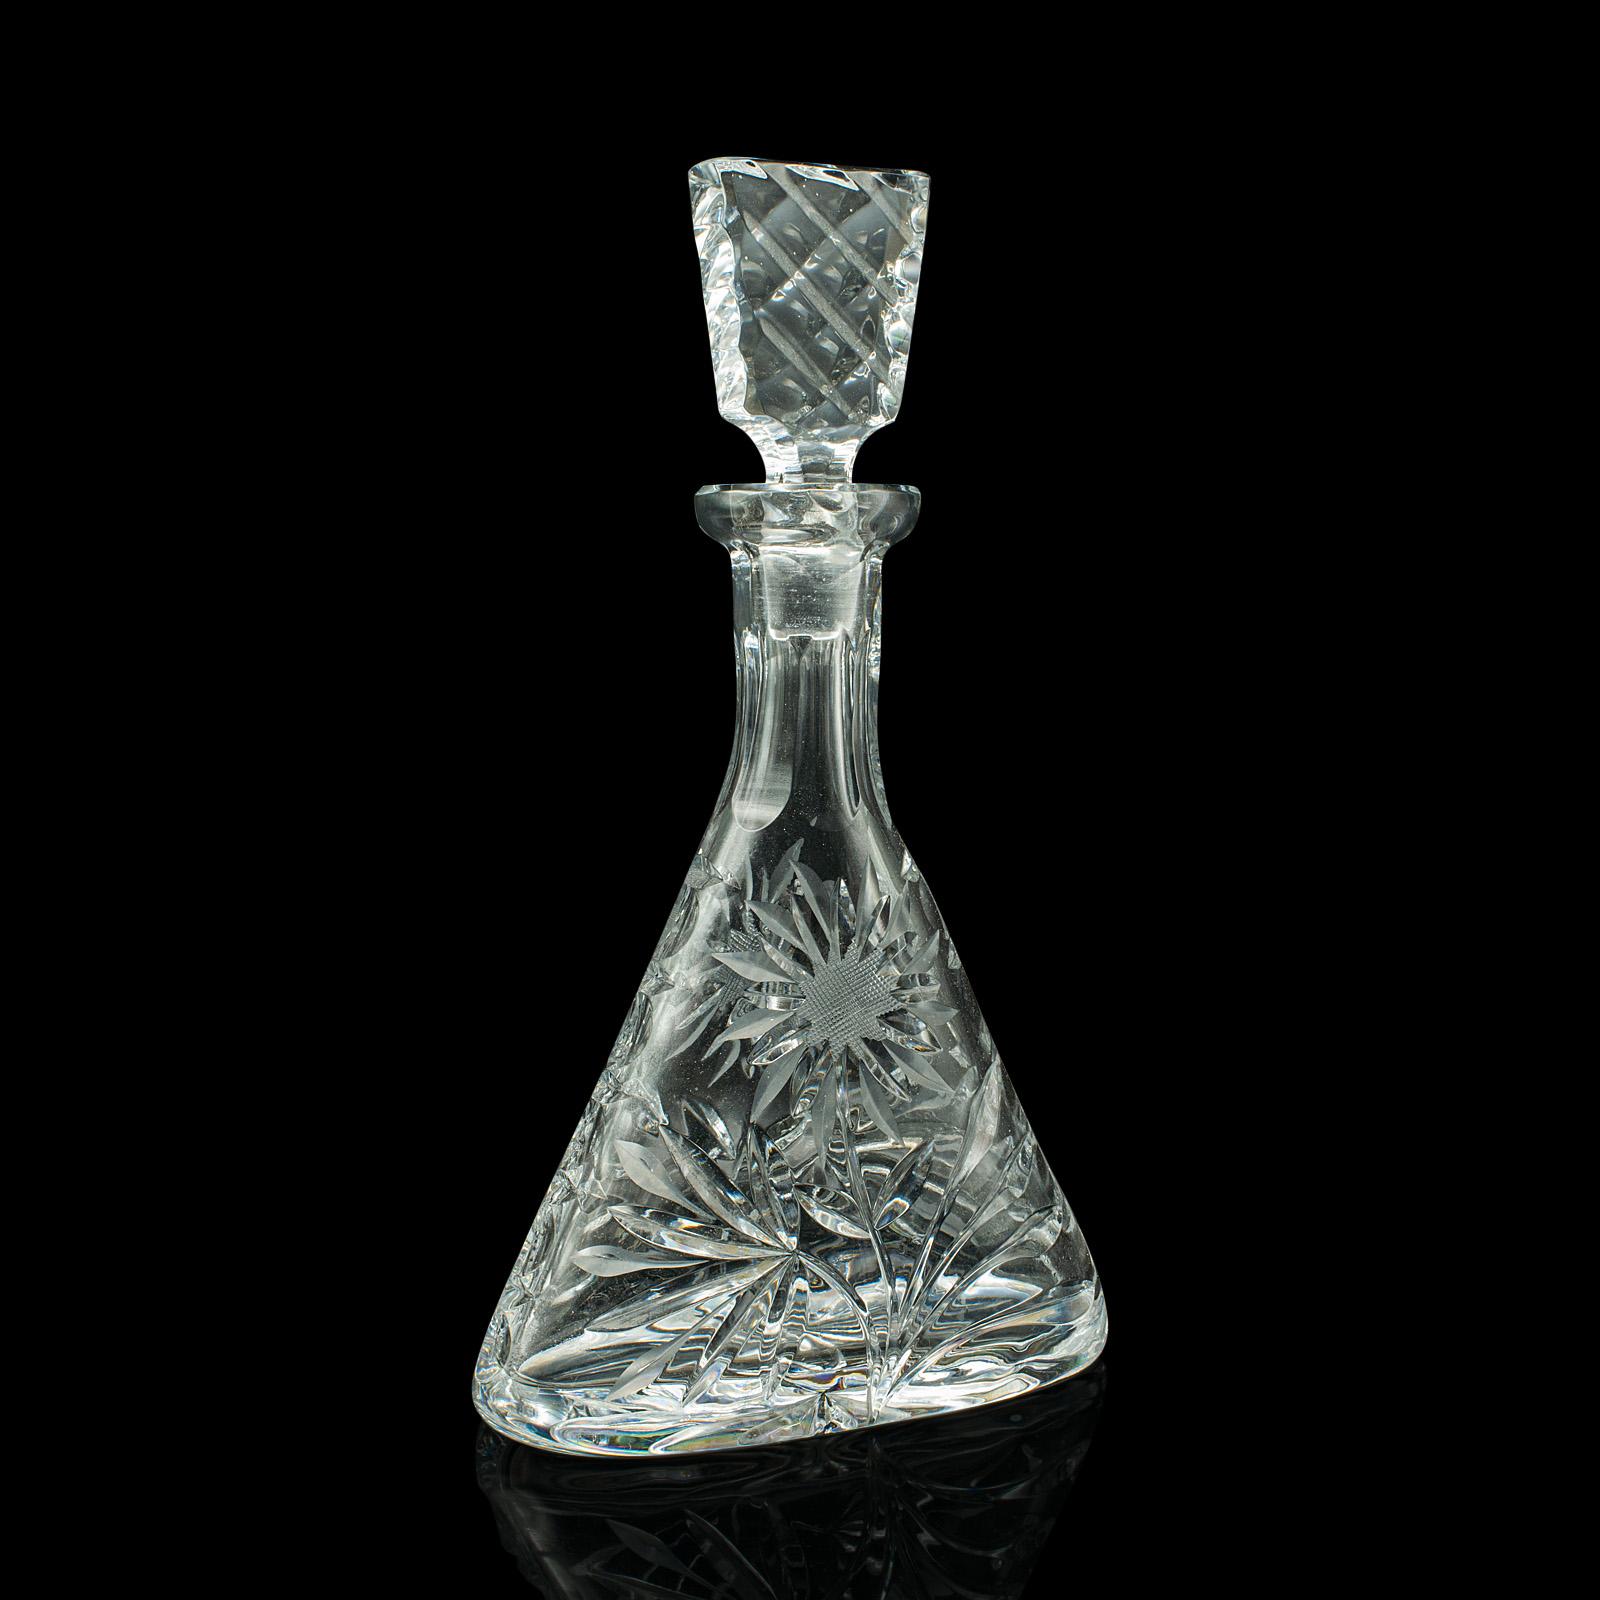 This is a vintage wine decanter. An English, cut glass spirit vessel, dating to the mid 20th century, circa 1960.

Superb decanter, with a great decorative appearance
Displays a desirable aged patina and in good order
Quality cut glass accentuates